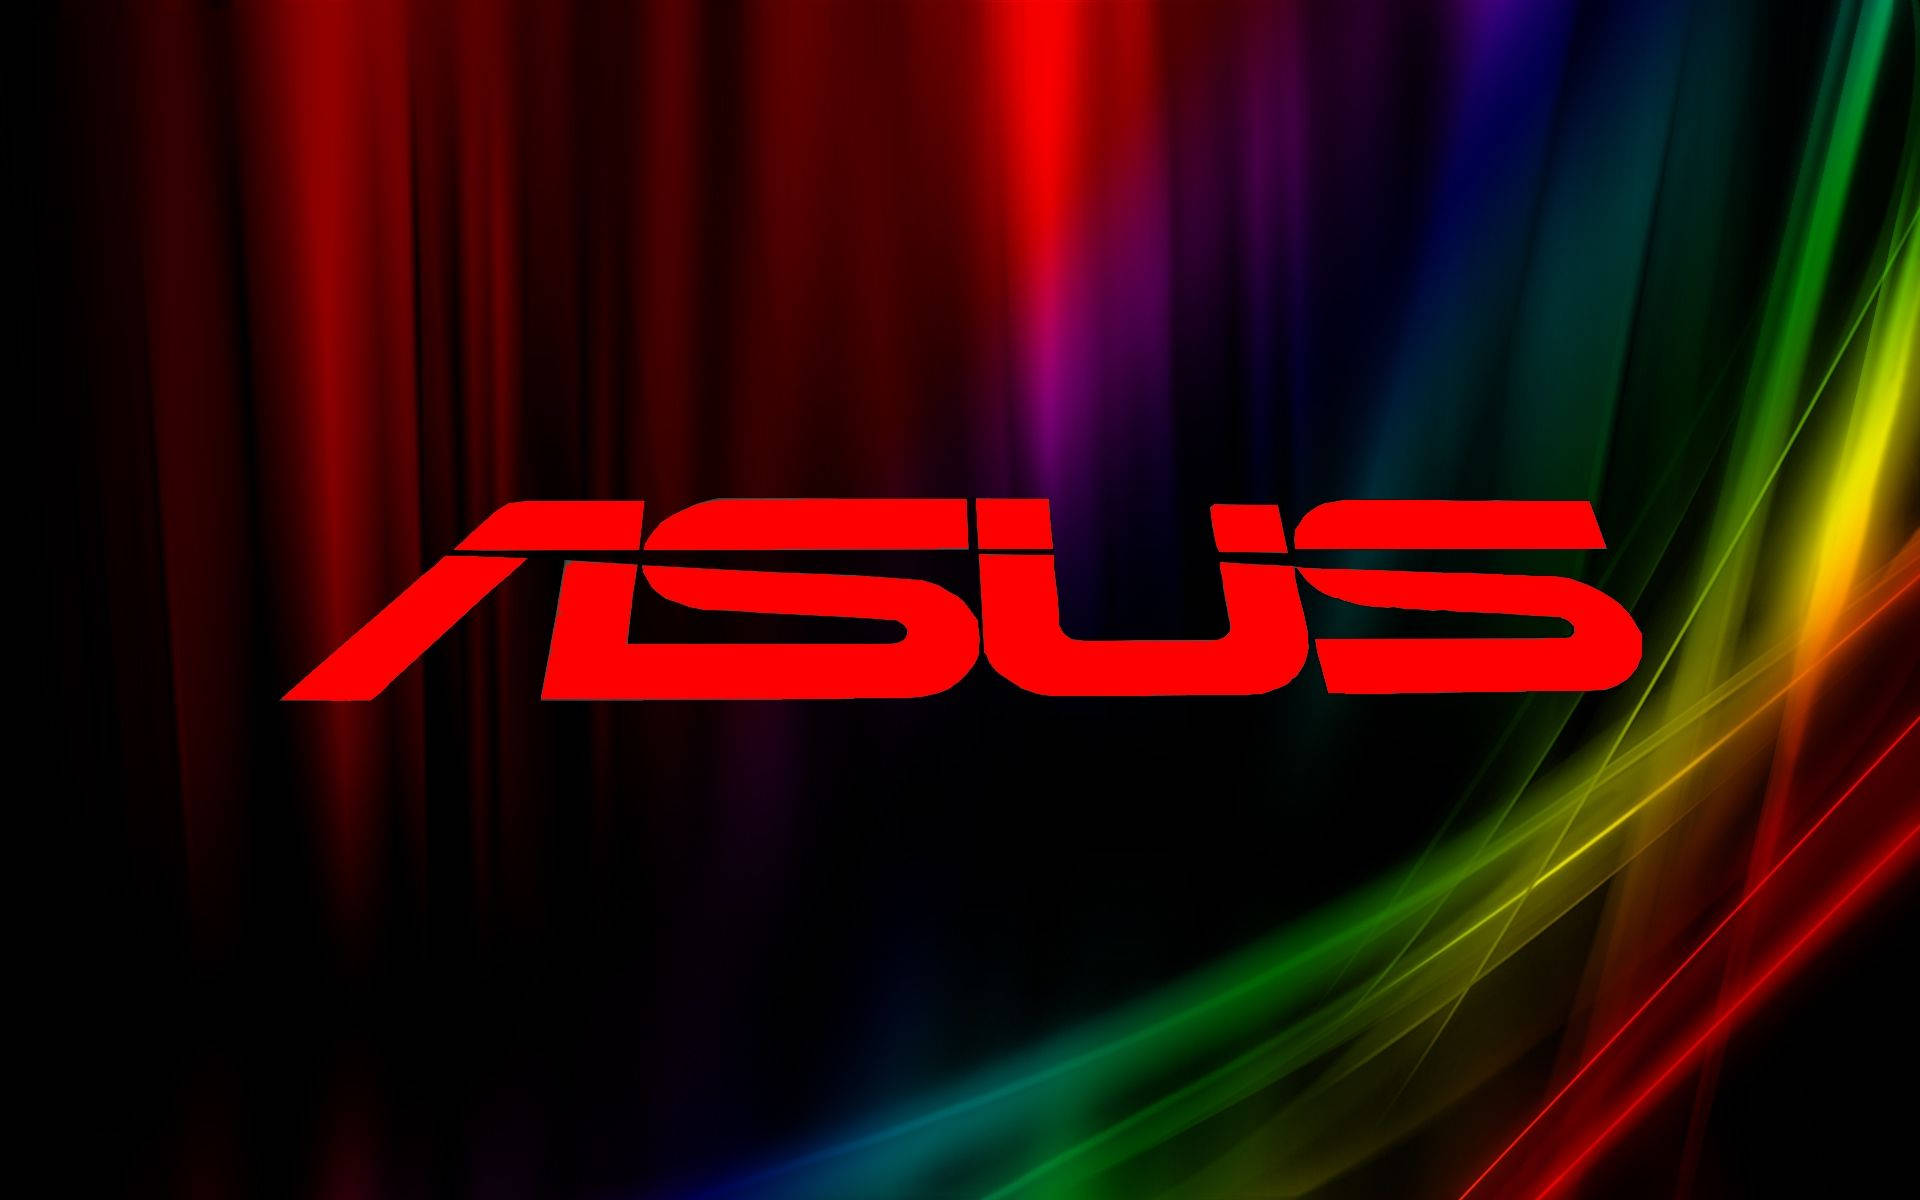 ASUS - designed for color and creativity Wallpaper